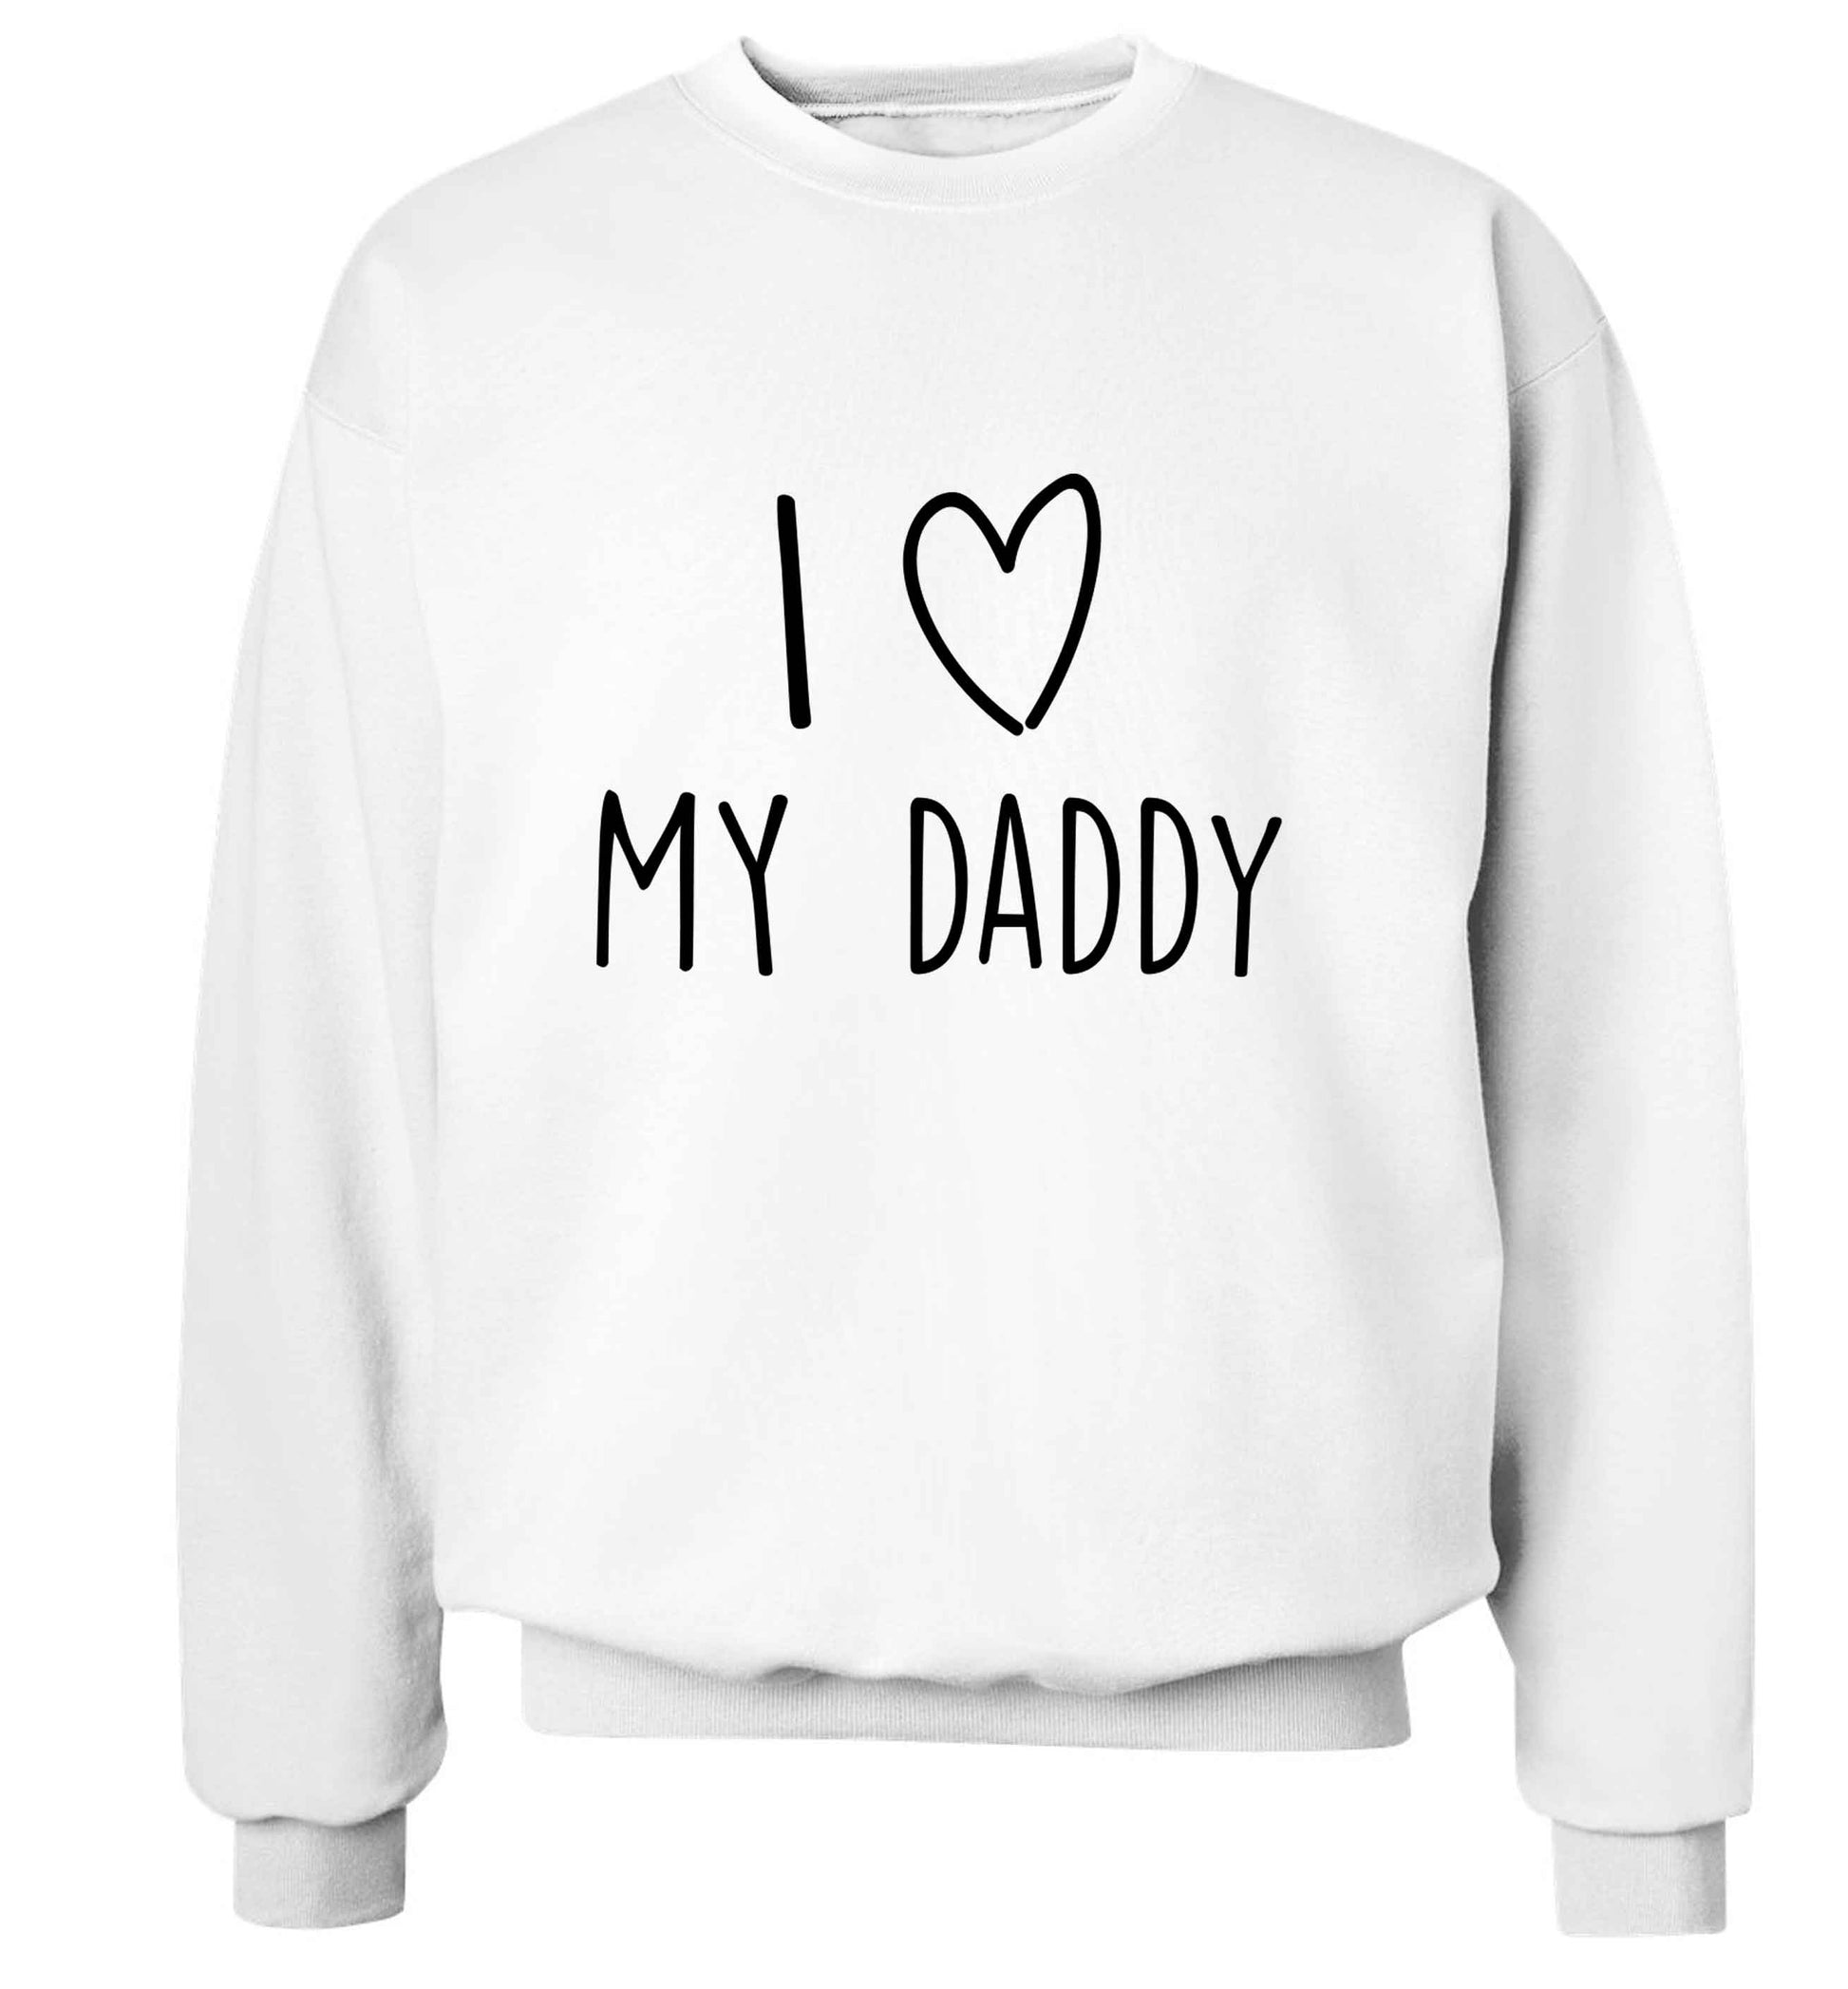 I love my daddy adult's unisex white sweater 2XL